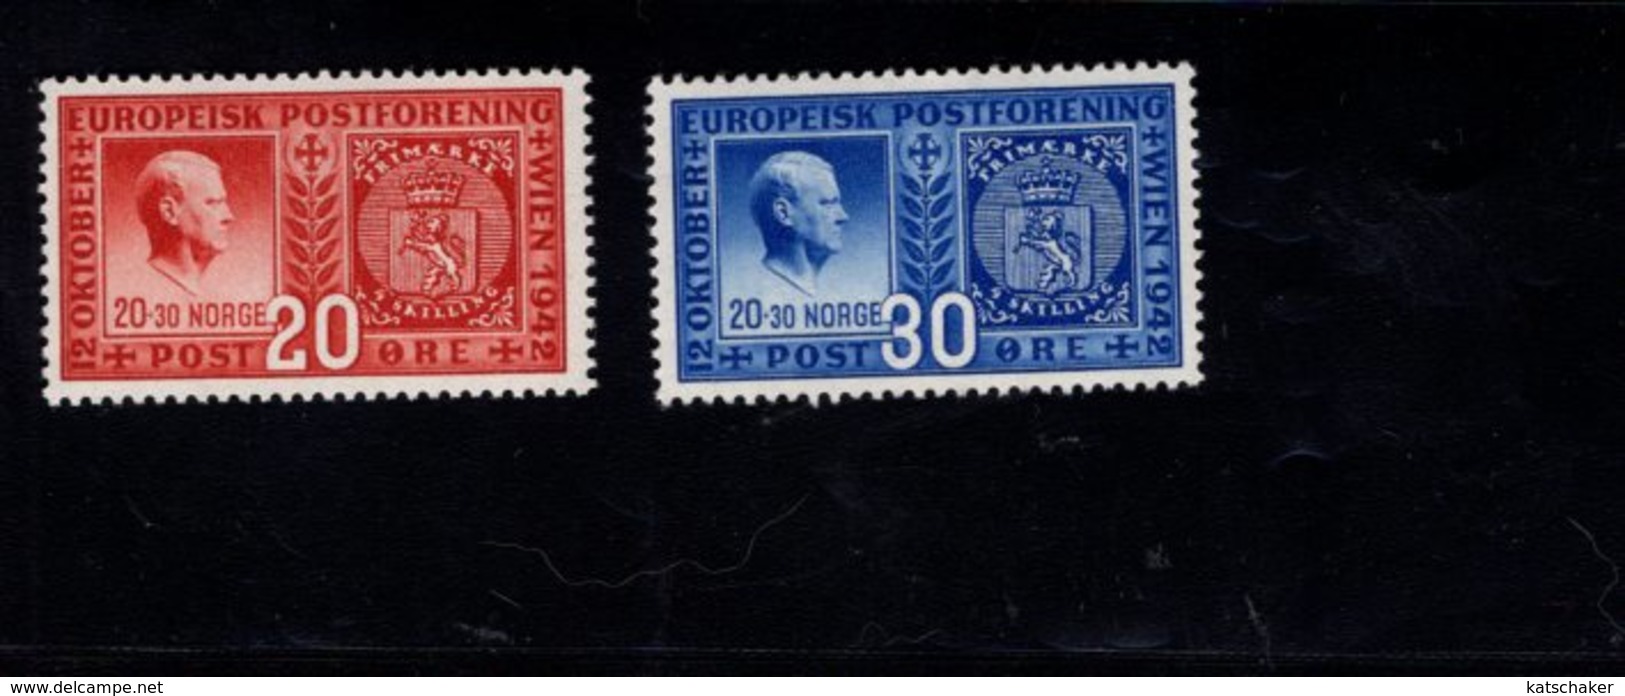 763029581 1942 SCOTT 253 254 POSTFRIS  MINT NEVER HINGED EINWANDFREI  (XX)  DESIGNS OF 1942 AND 1855 STAMPS OF NORWAY - Neufs